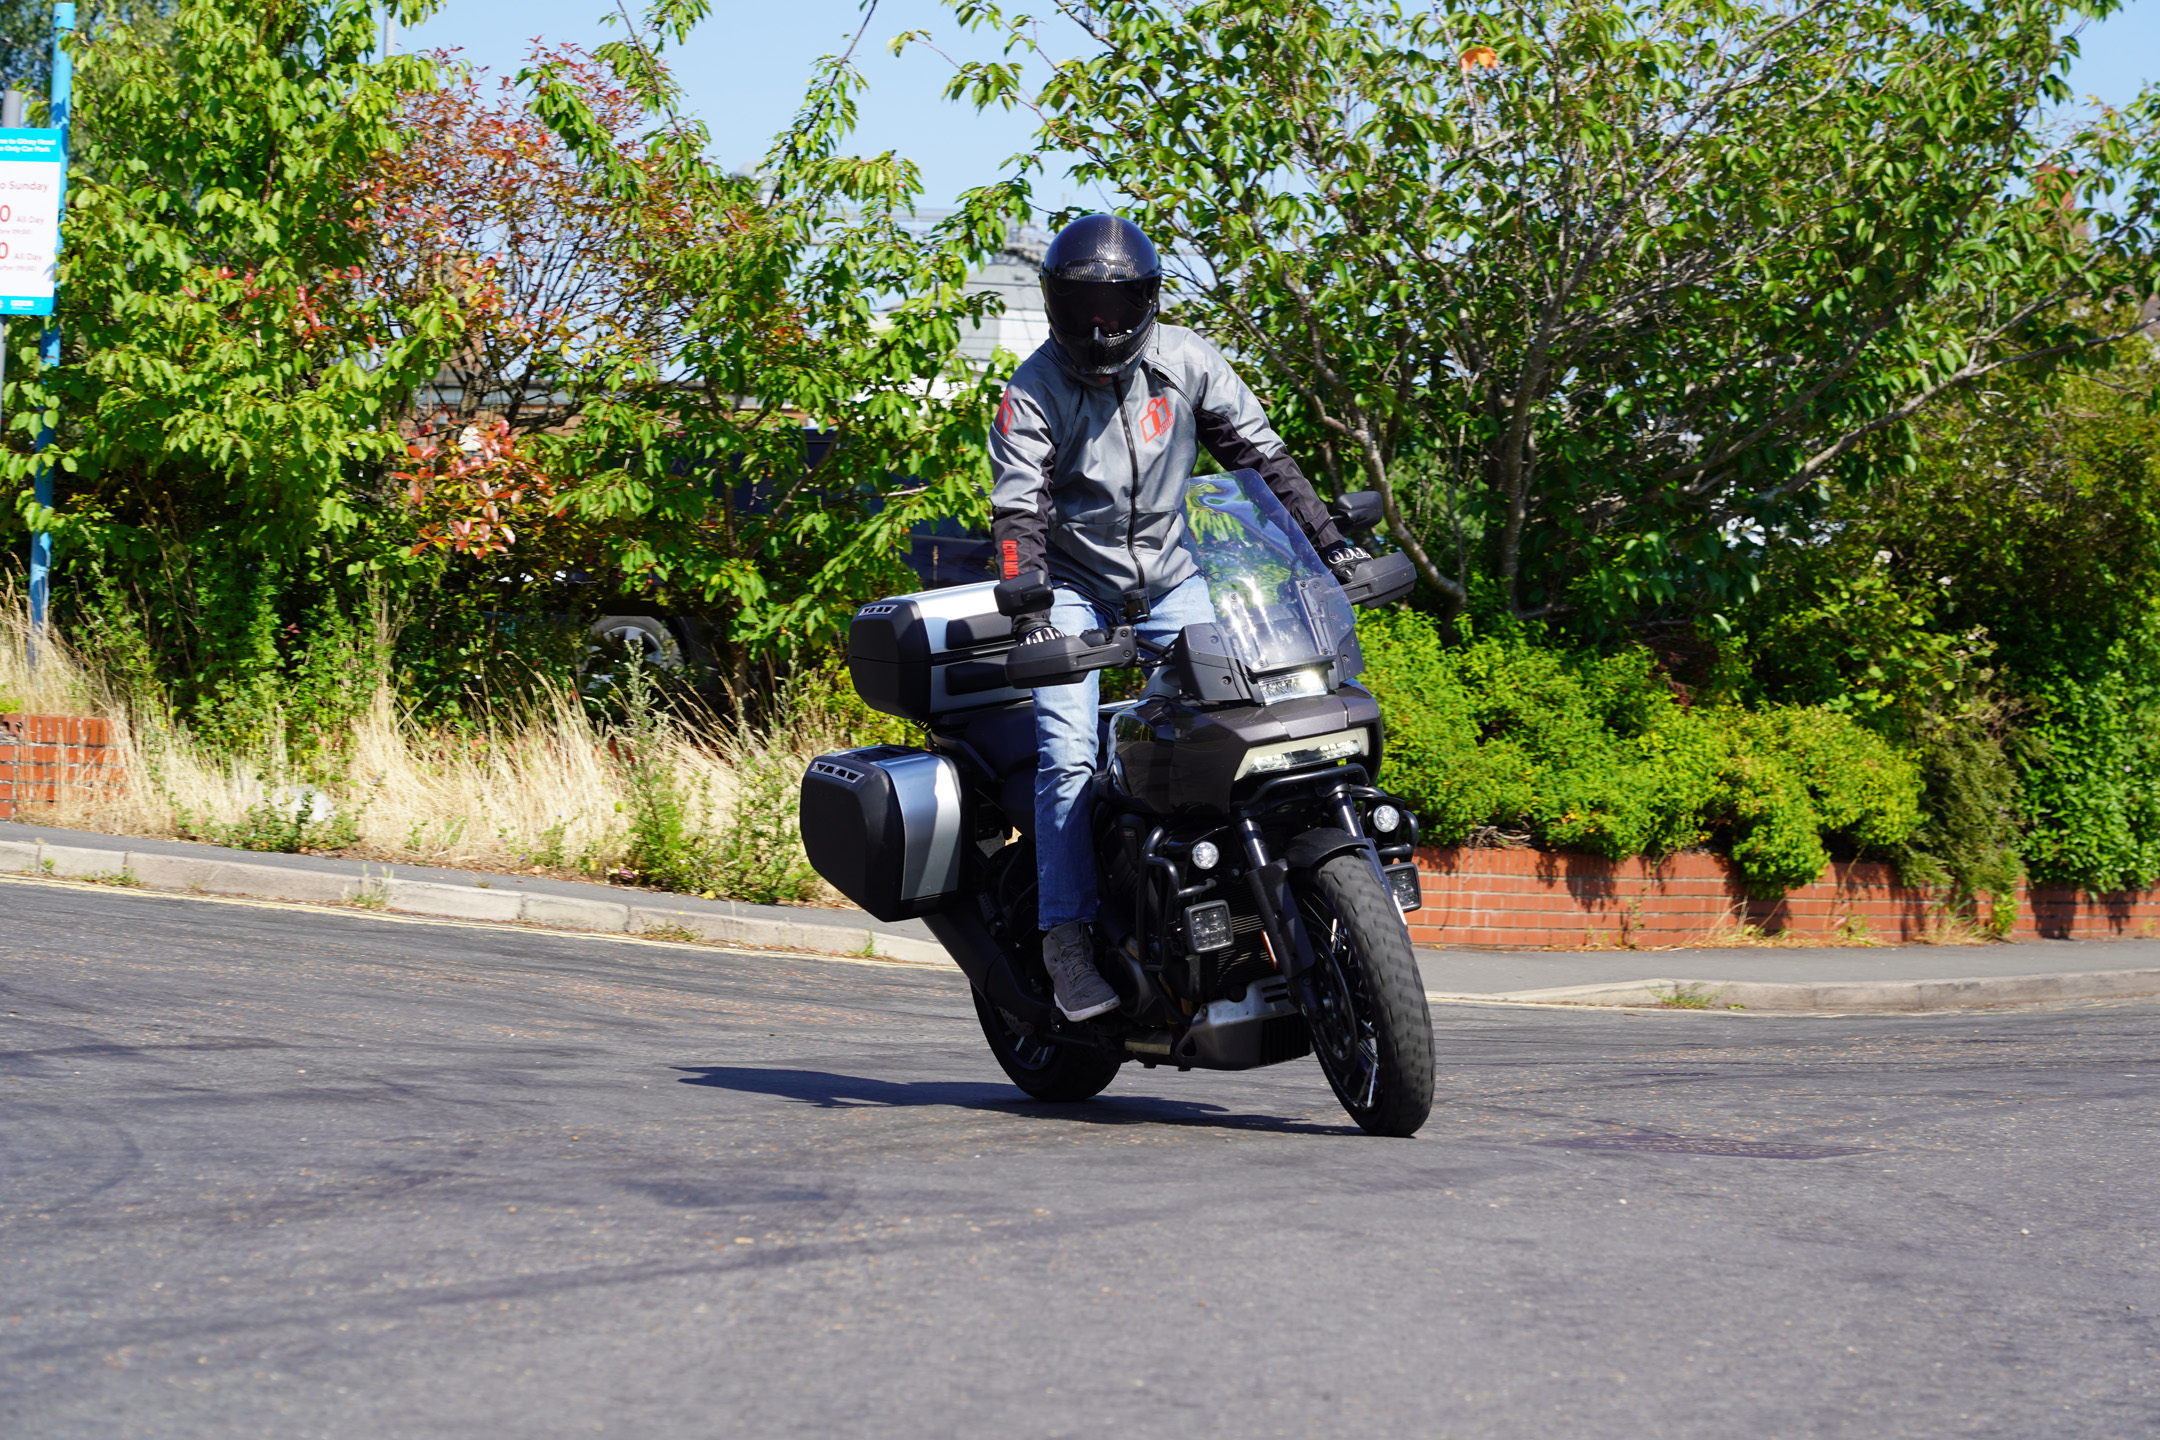 Standing up on the Harley-Davidson Pan America 1250 Special